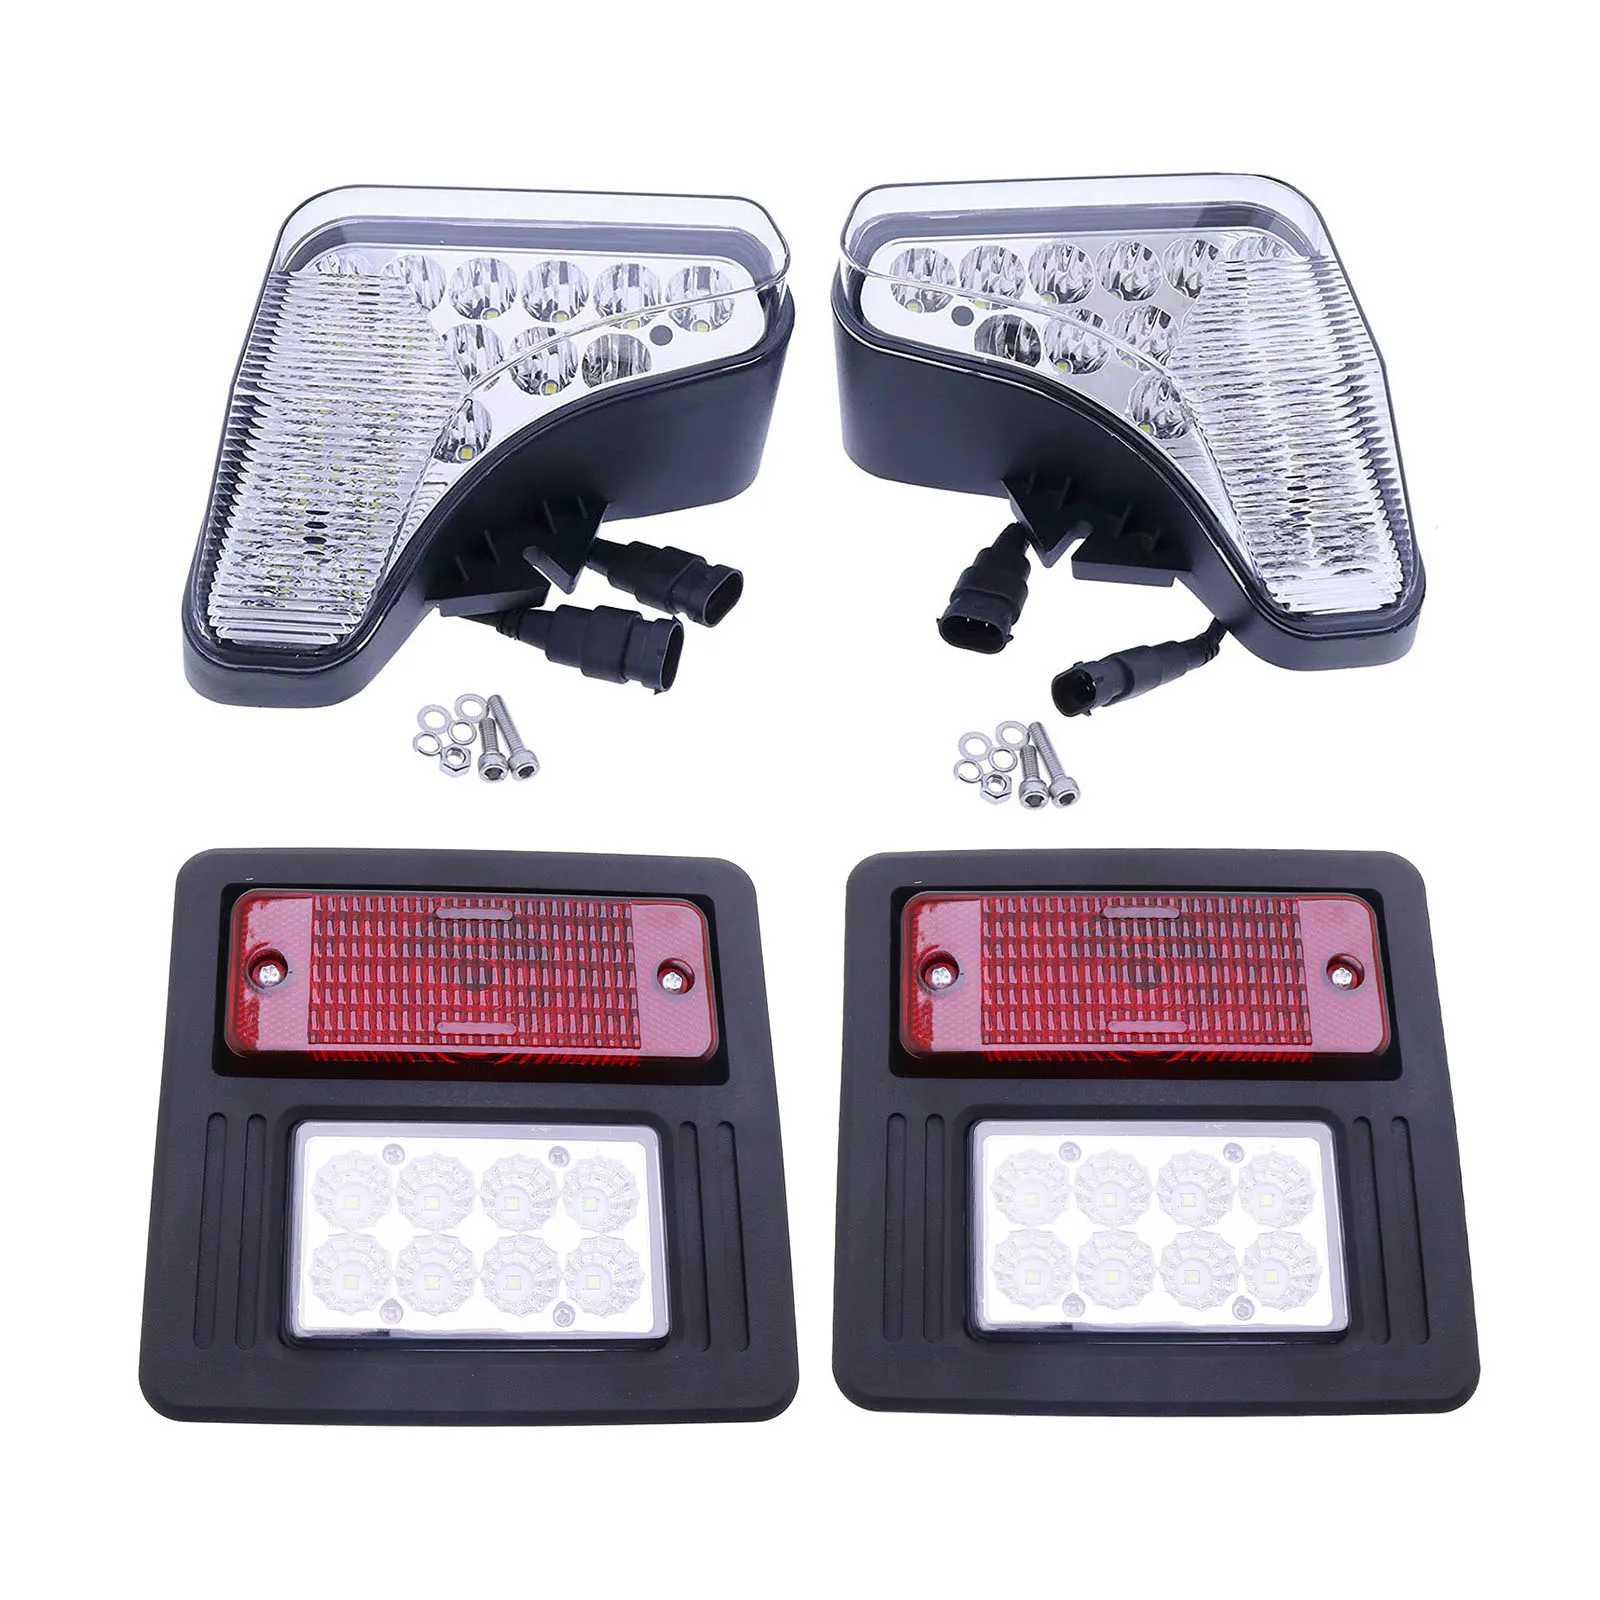 

New LED Head & Rear Light Kit 6670284 7251340 & 7251341 Compatible with Bobcat Skid Steer A770 S450 S510 S530 S550 S570 S850